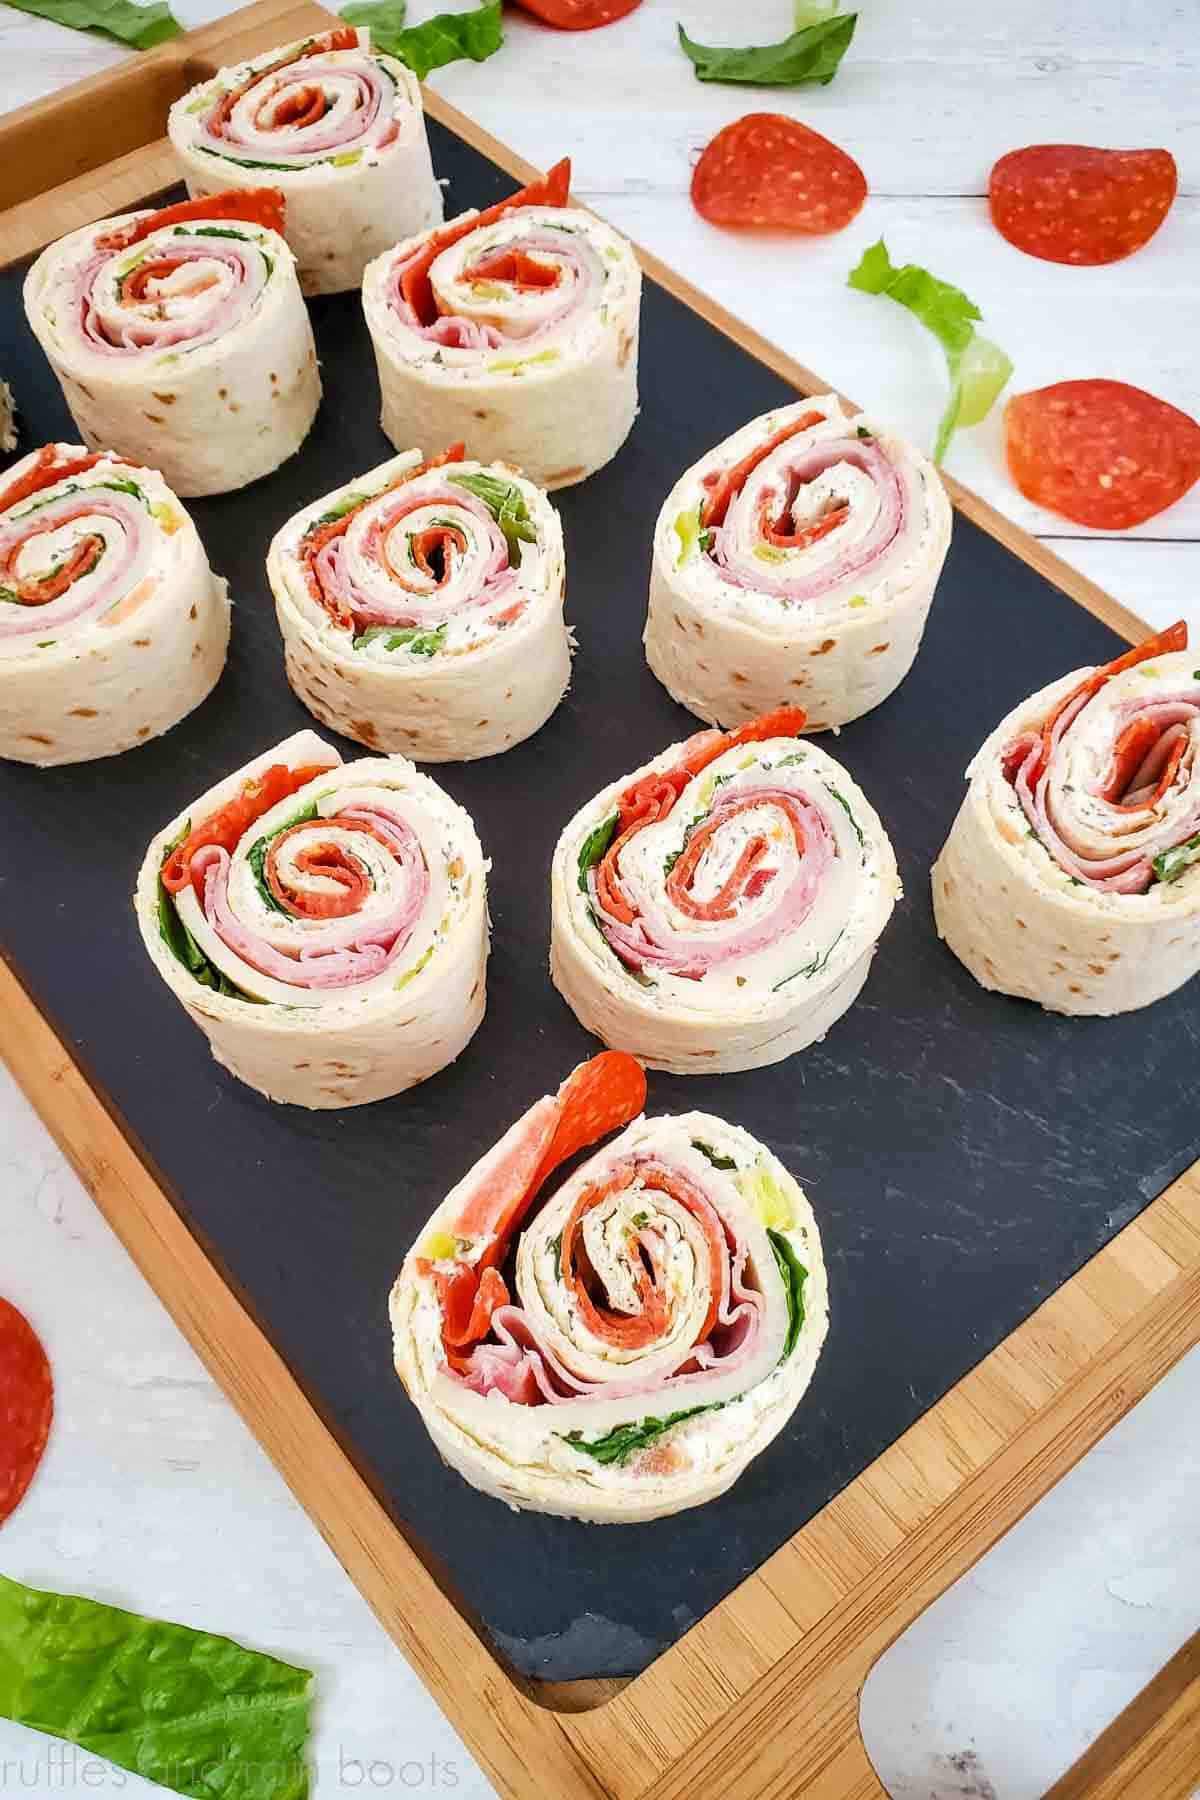 Many pinwheel sandwiches made with Italian meats for a quick lunch idea.